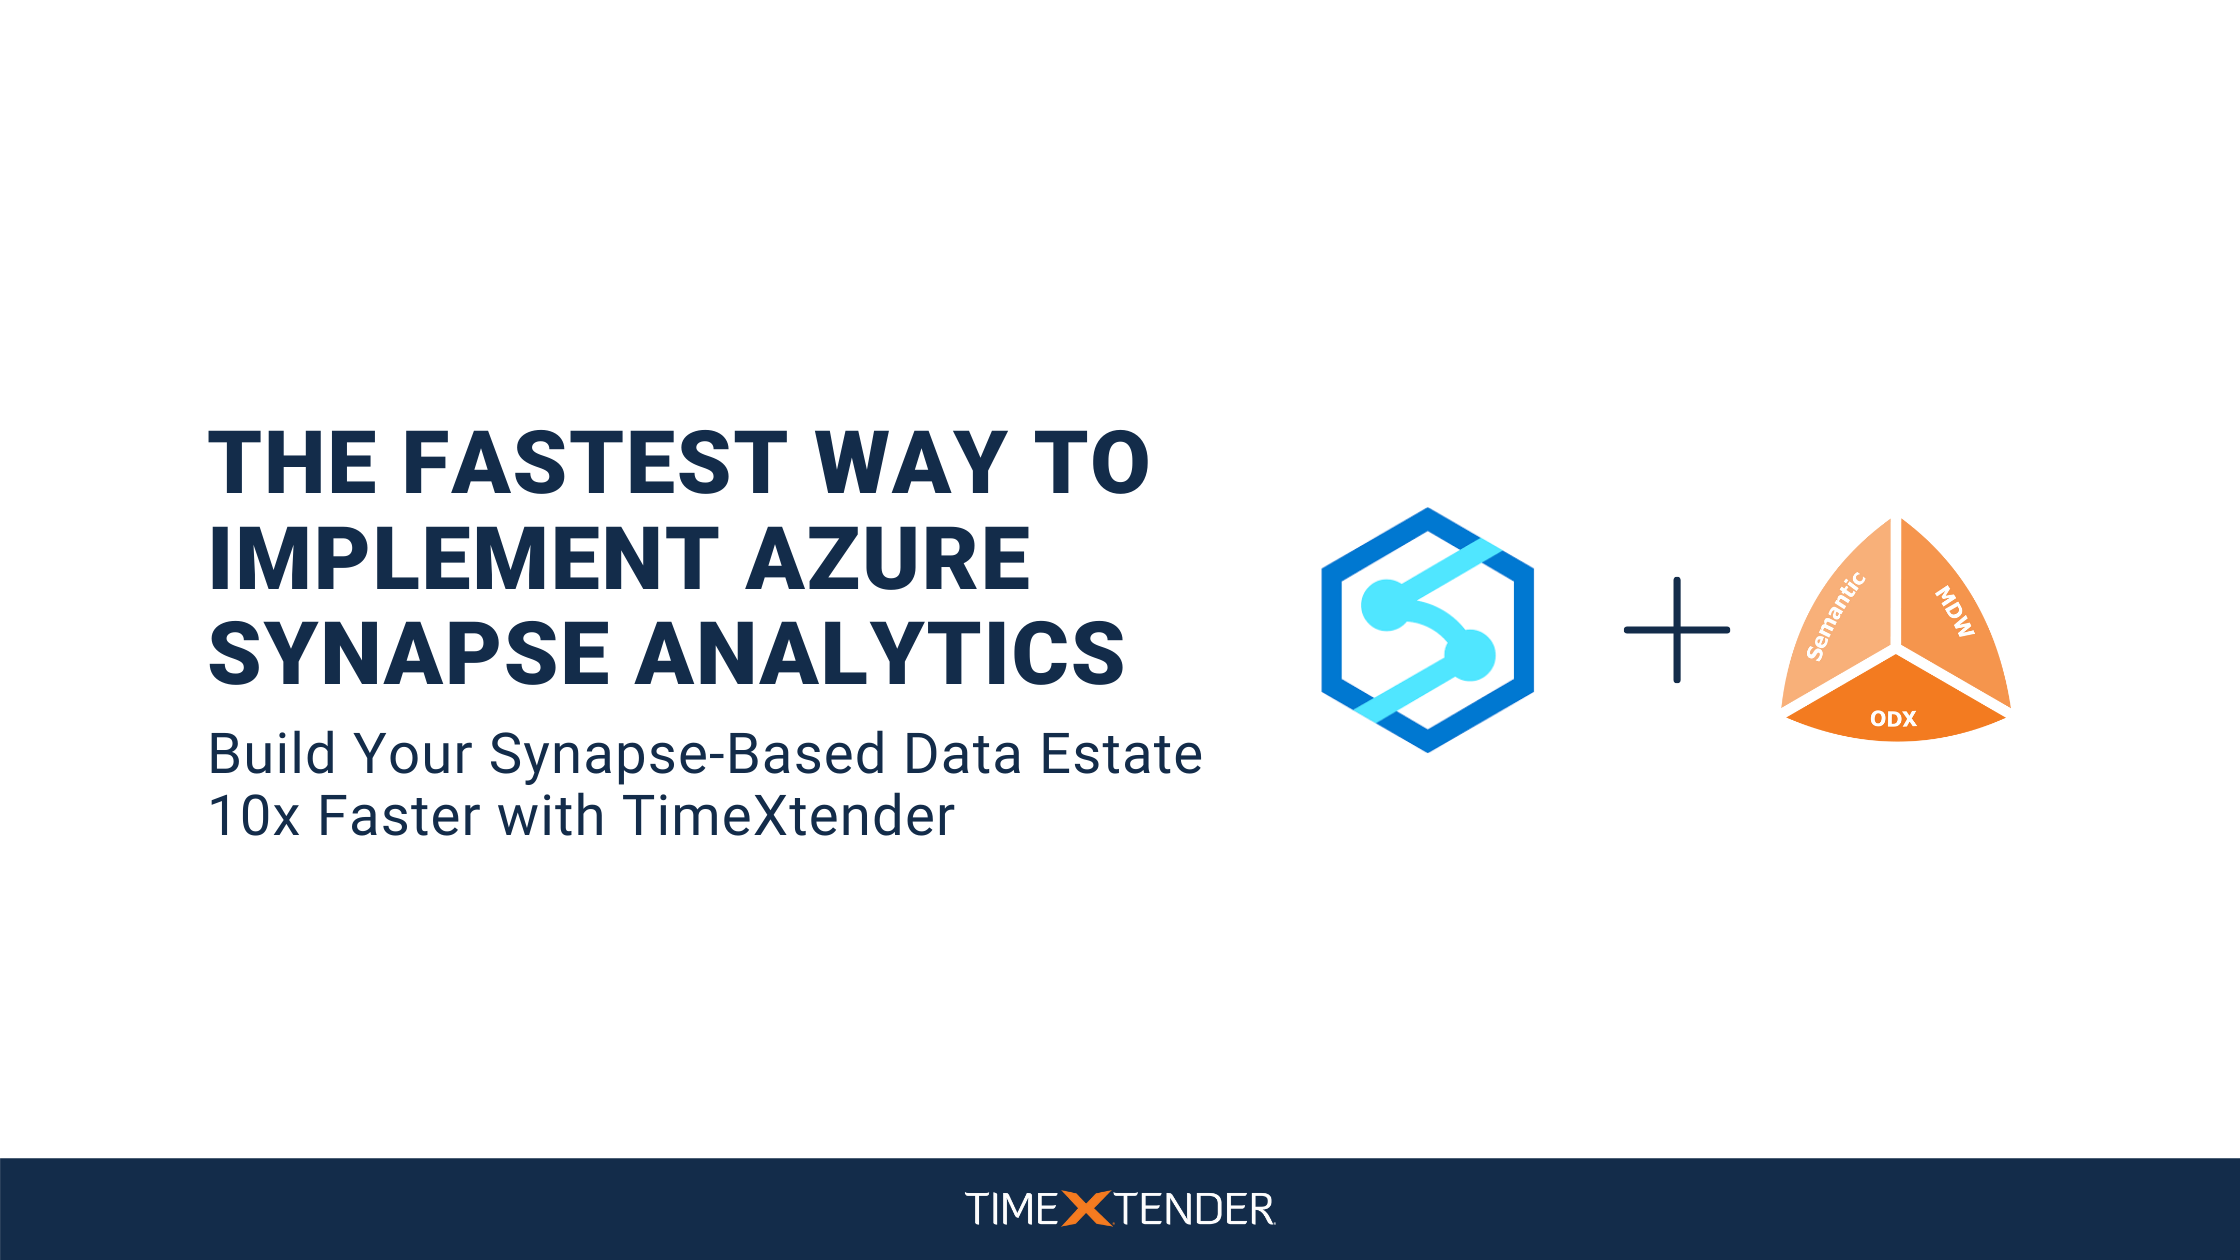 Implement Azure Synapse Analytics Faster with TimeXtender